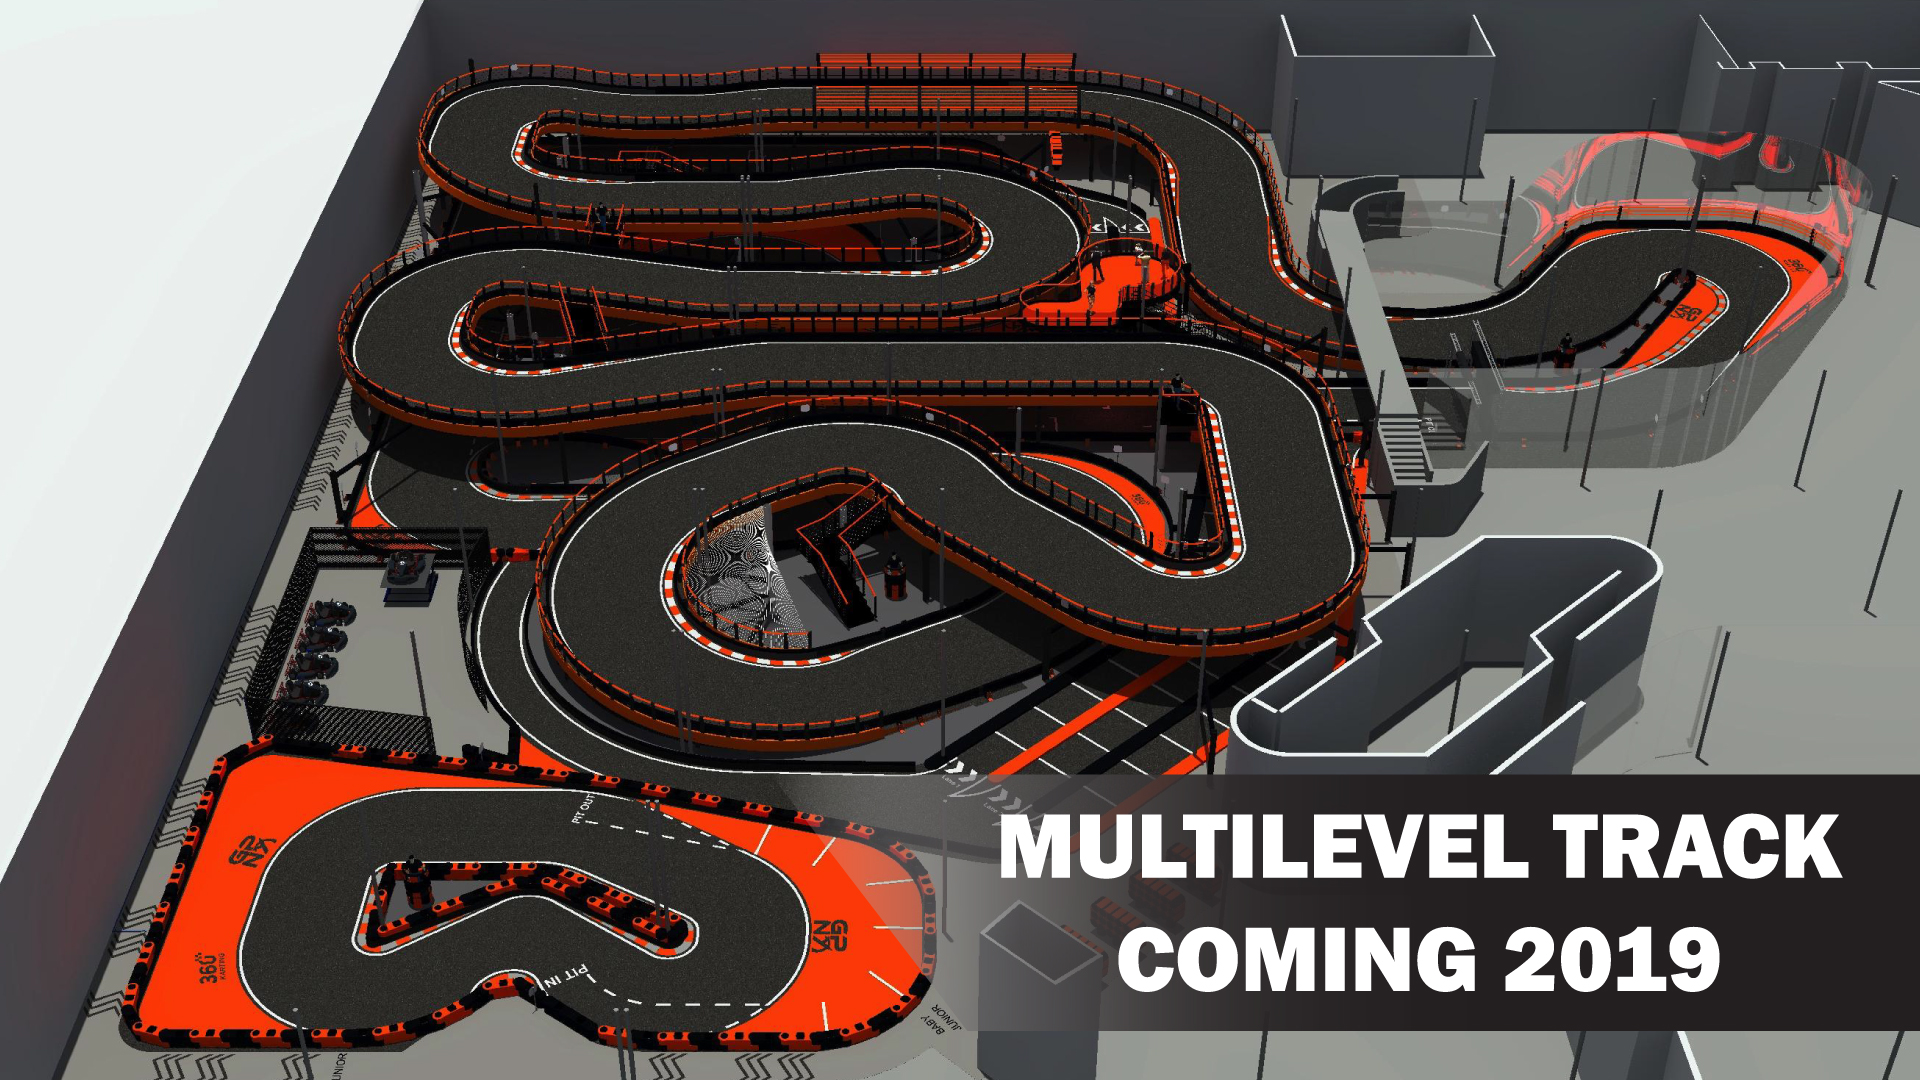 Race track cartoon. Трек Ride out. Track of Levels. Macan, Scirena - lvl трек. Site track